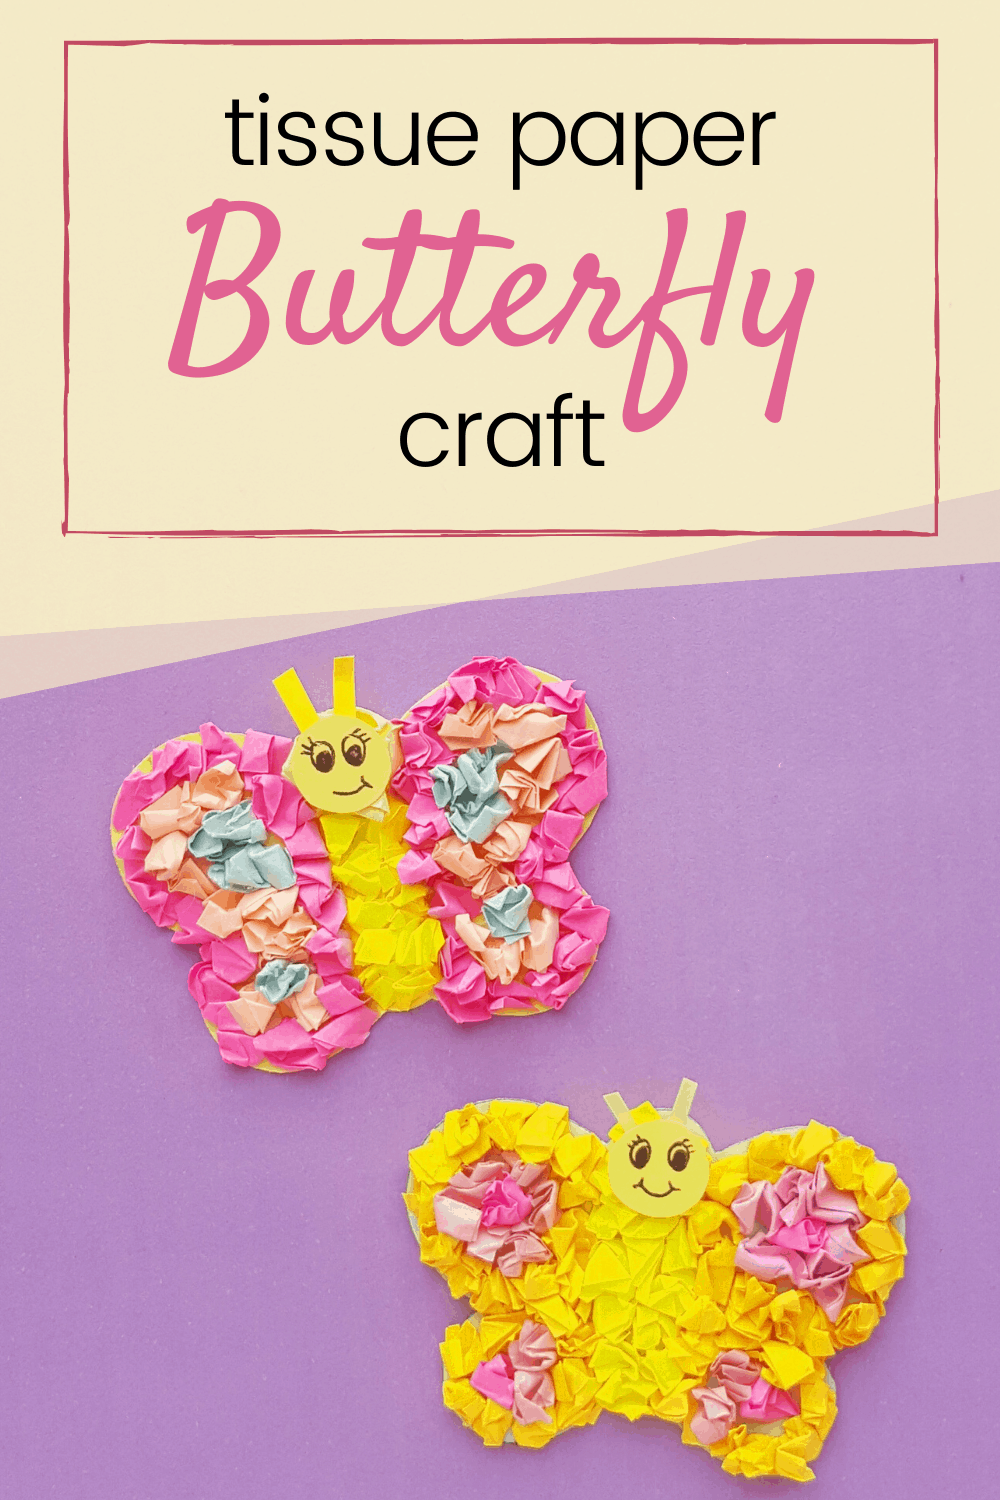 This adorable tissue paper preschool butterfly craft is not only pretty enough to put on display, but it's a great way to build motor skills.